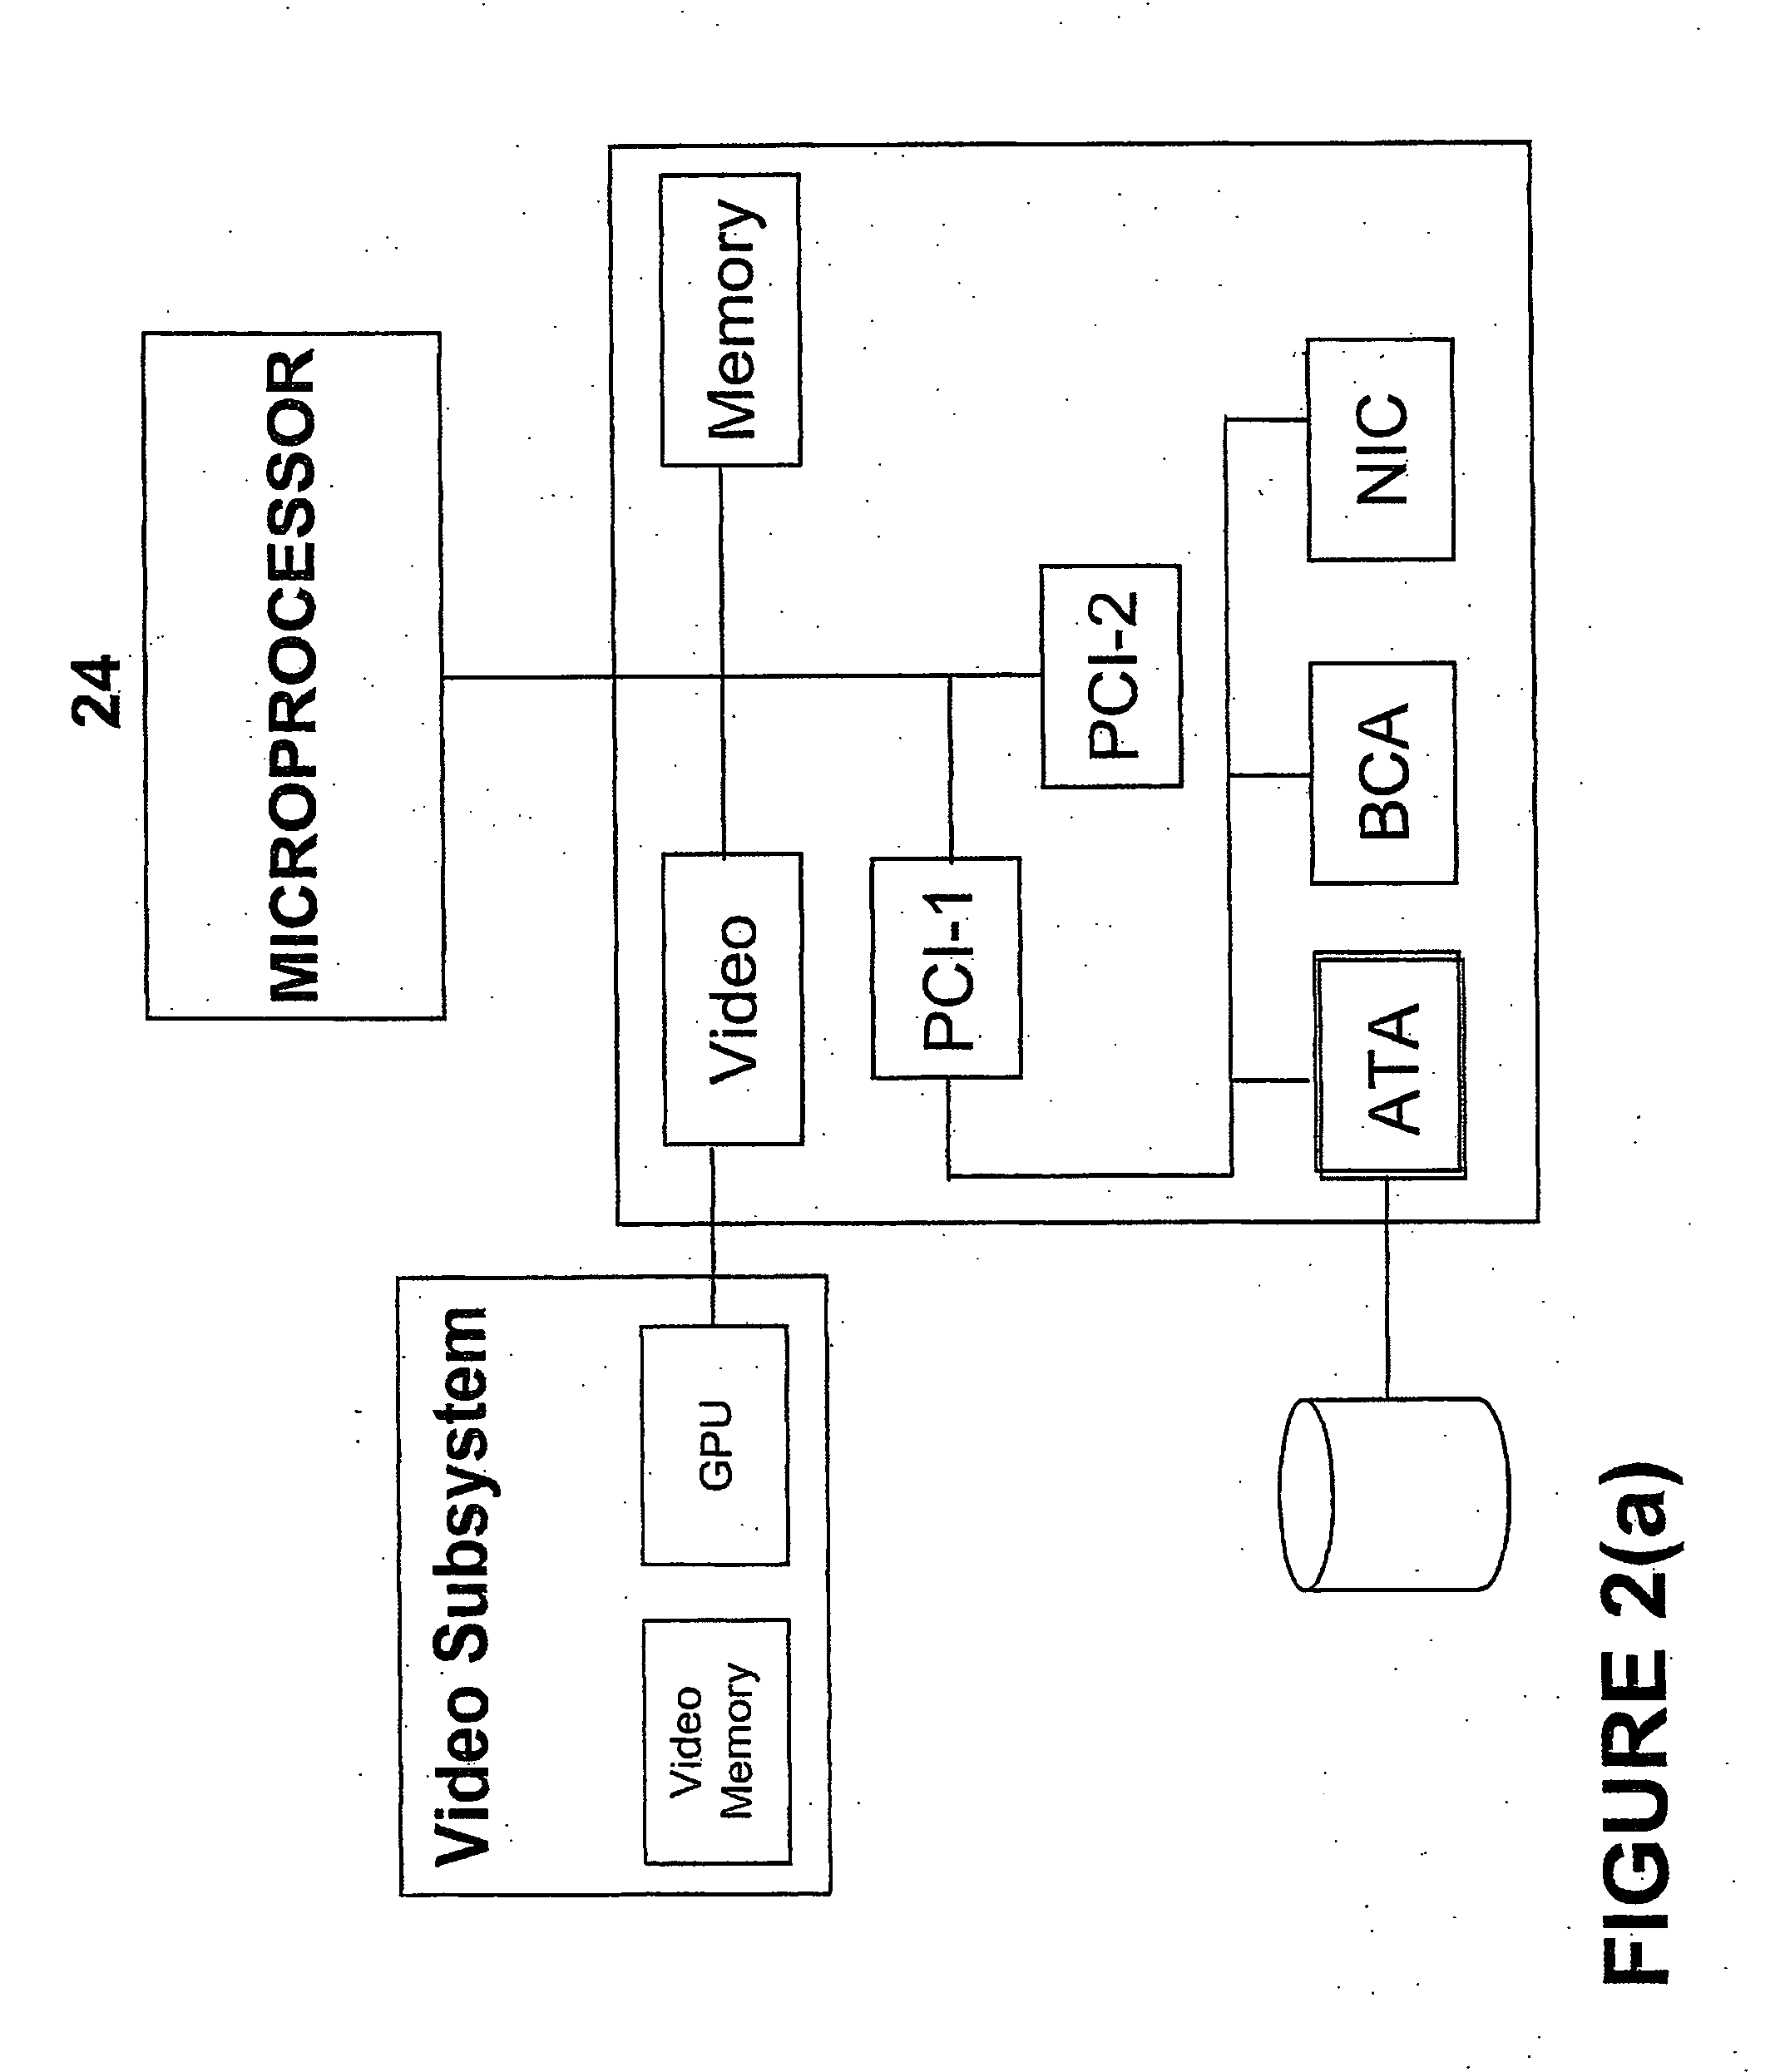 System and method for processing graphics operations with graphics processing unit